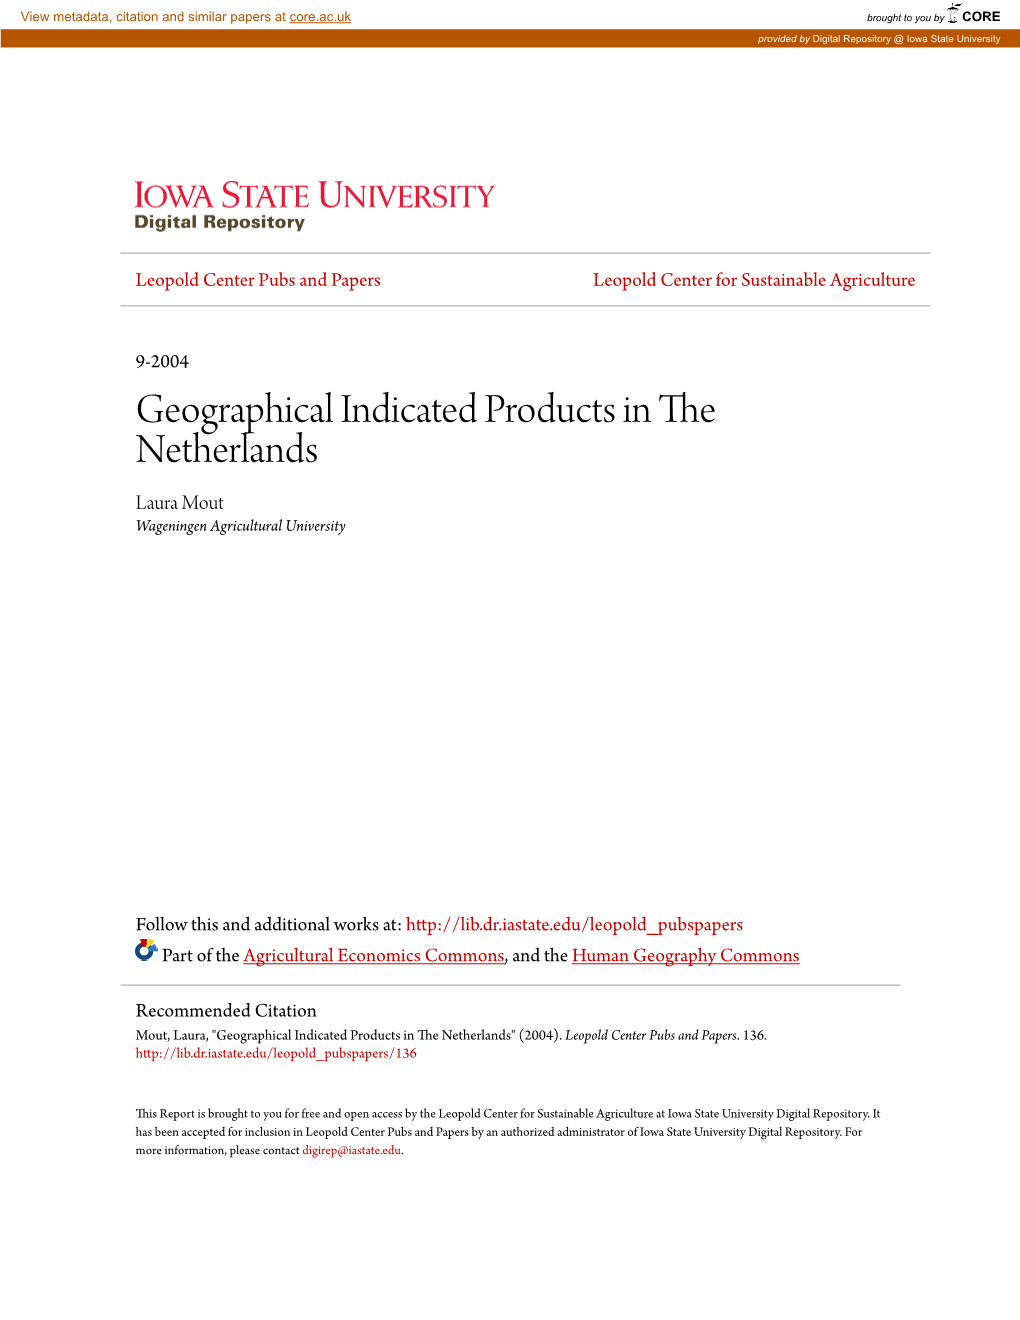 Geographical Indicated Products in the Netherlands Laura Mout Wageningen Agricultural University